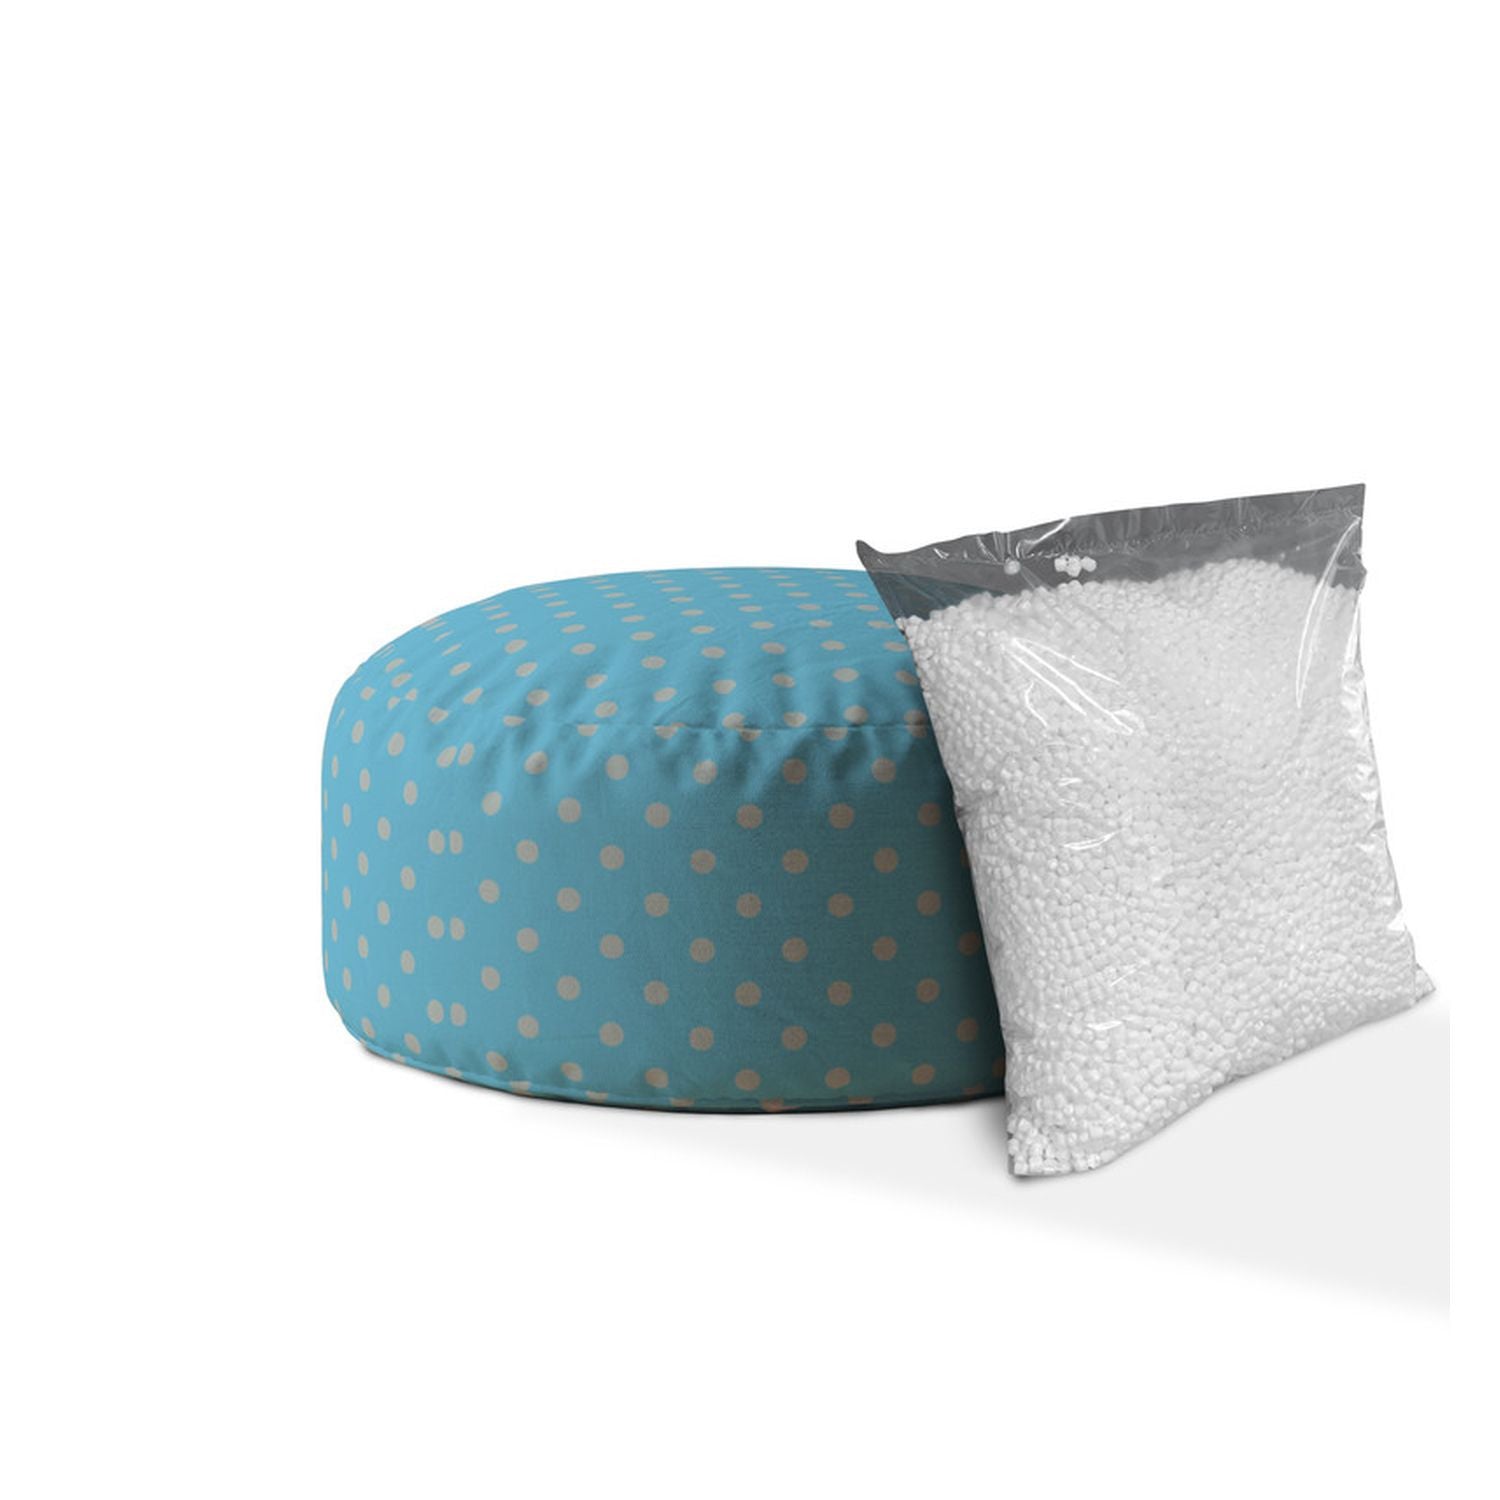 24" Blue And Gray Cotton Round Polka Dots Pouf Cover